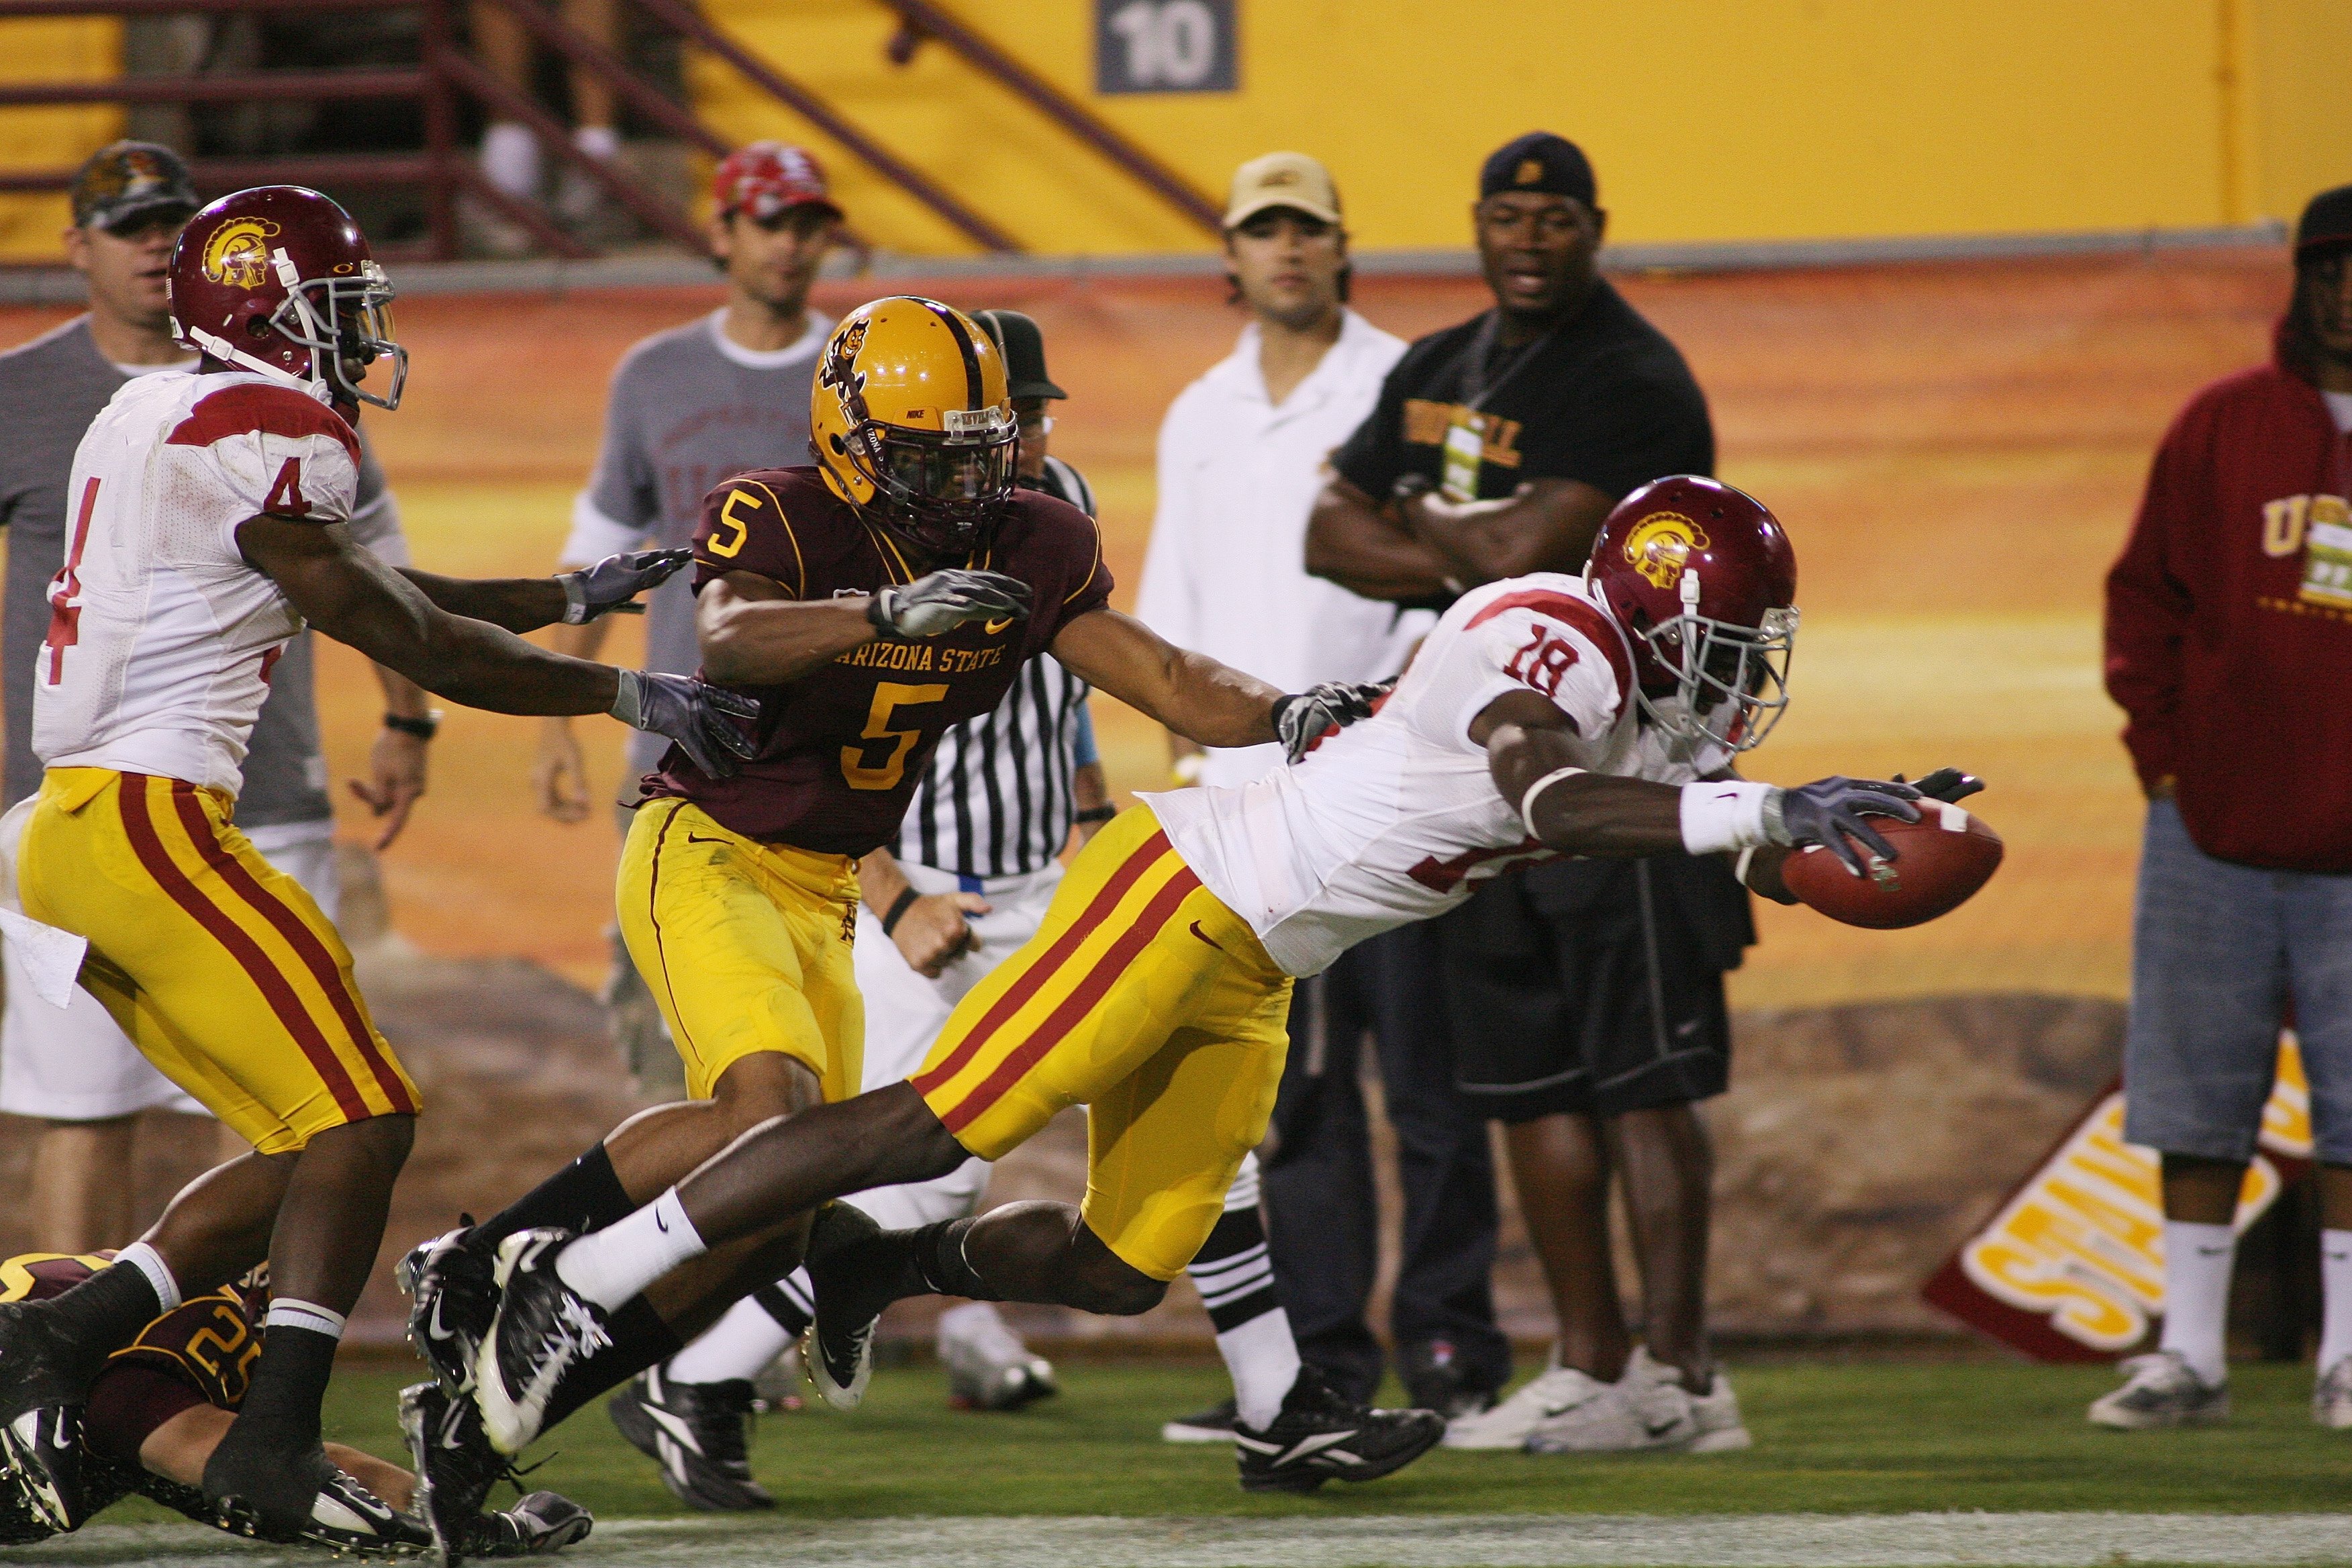 TEMPE, AZ - NOVEMBER 7:  Wide receiver Damian Williams #18 of the USC Trojans dives for the endzone with the ball on a 75 yard touchdown reception against Terell Carr #5 of the Arizona State Sun Devils in the third quarter on November 7, 2009 at Sun Devil